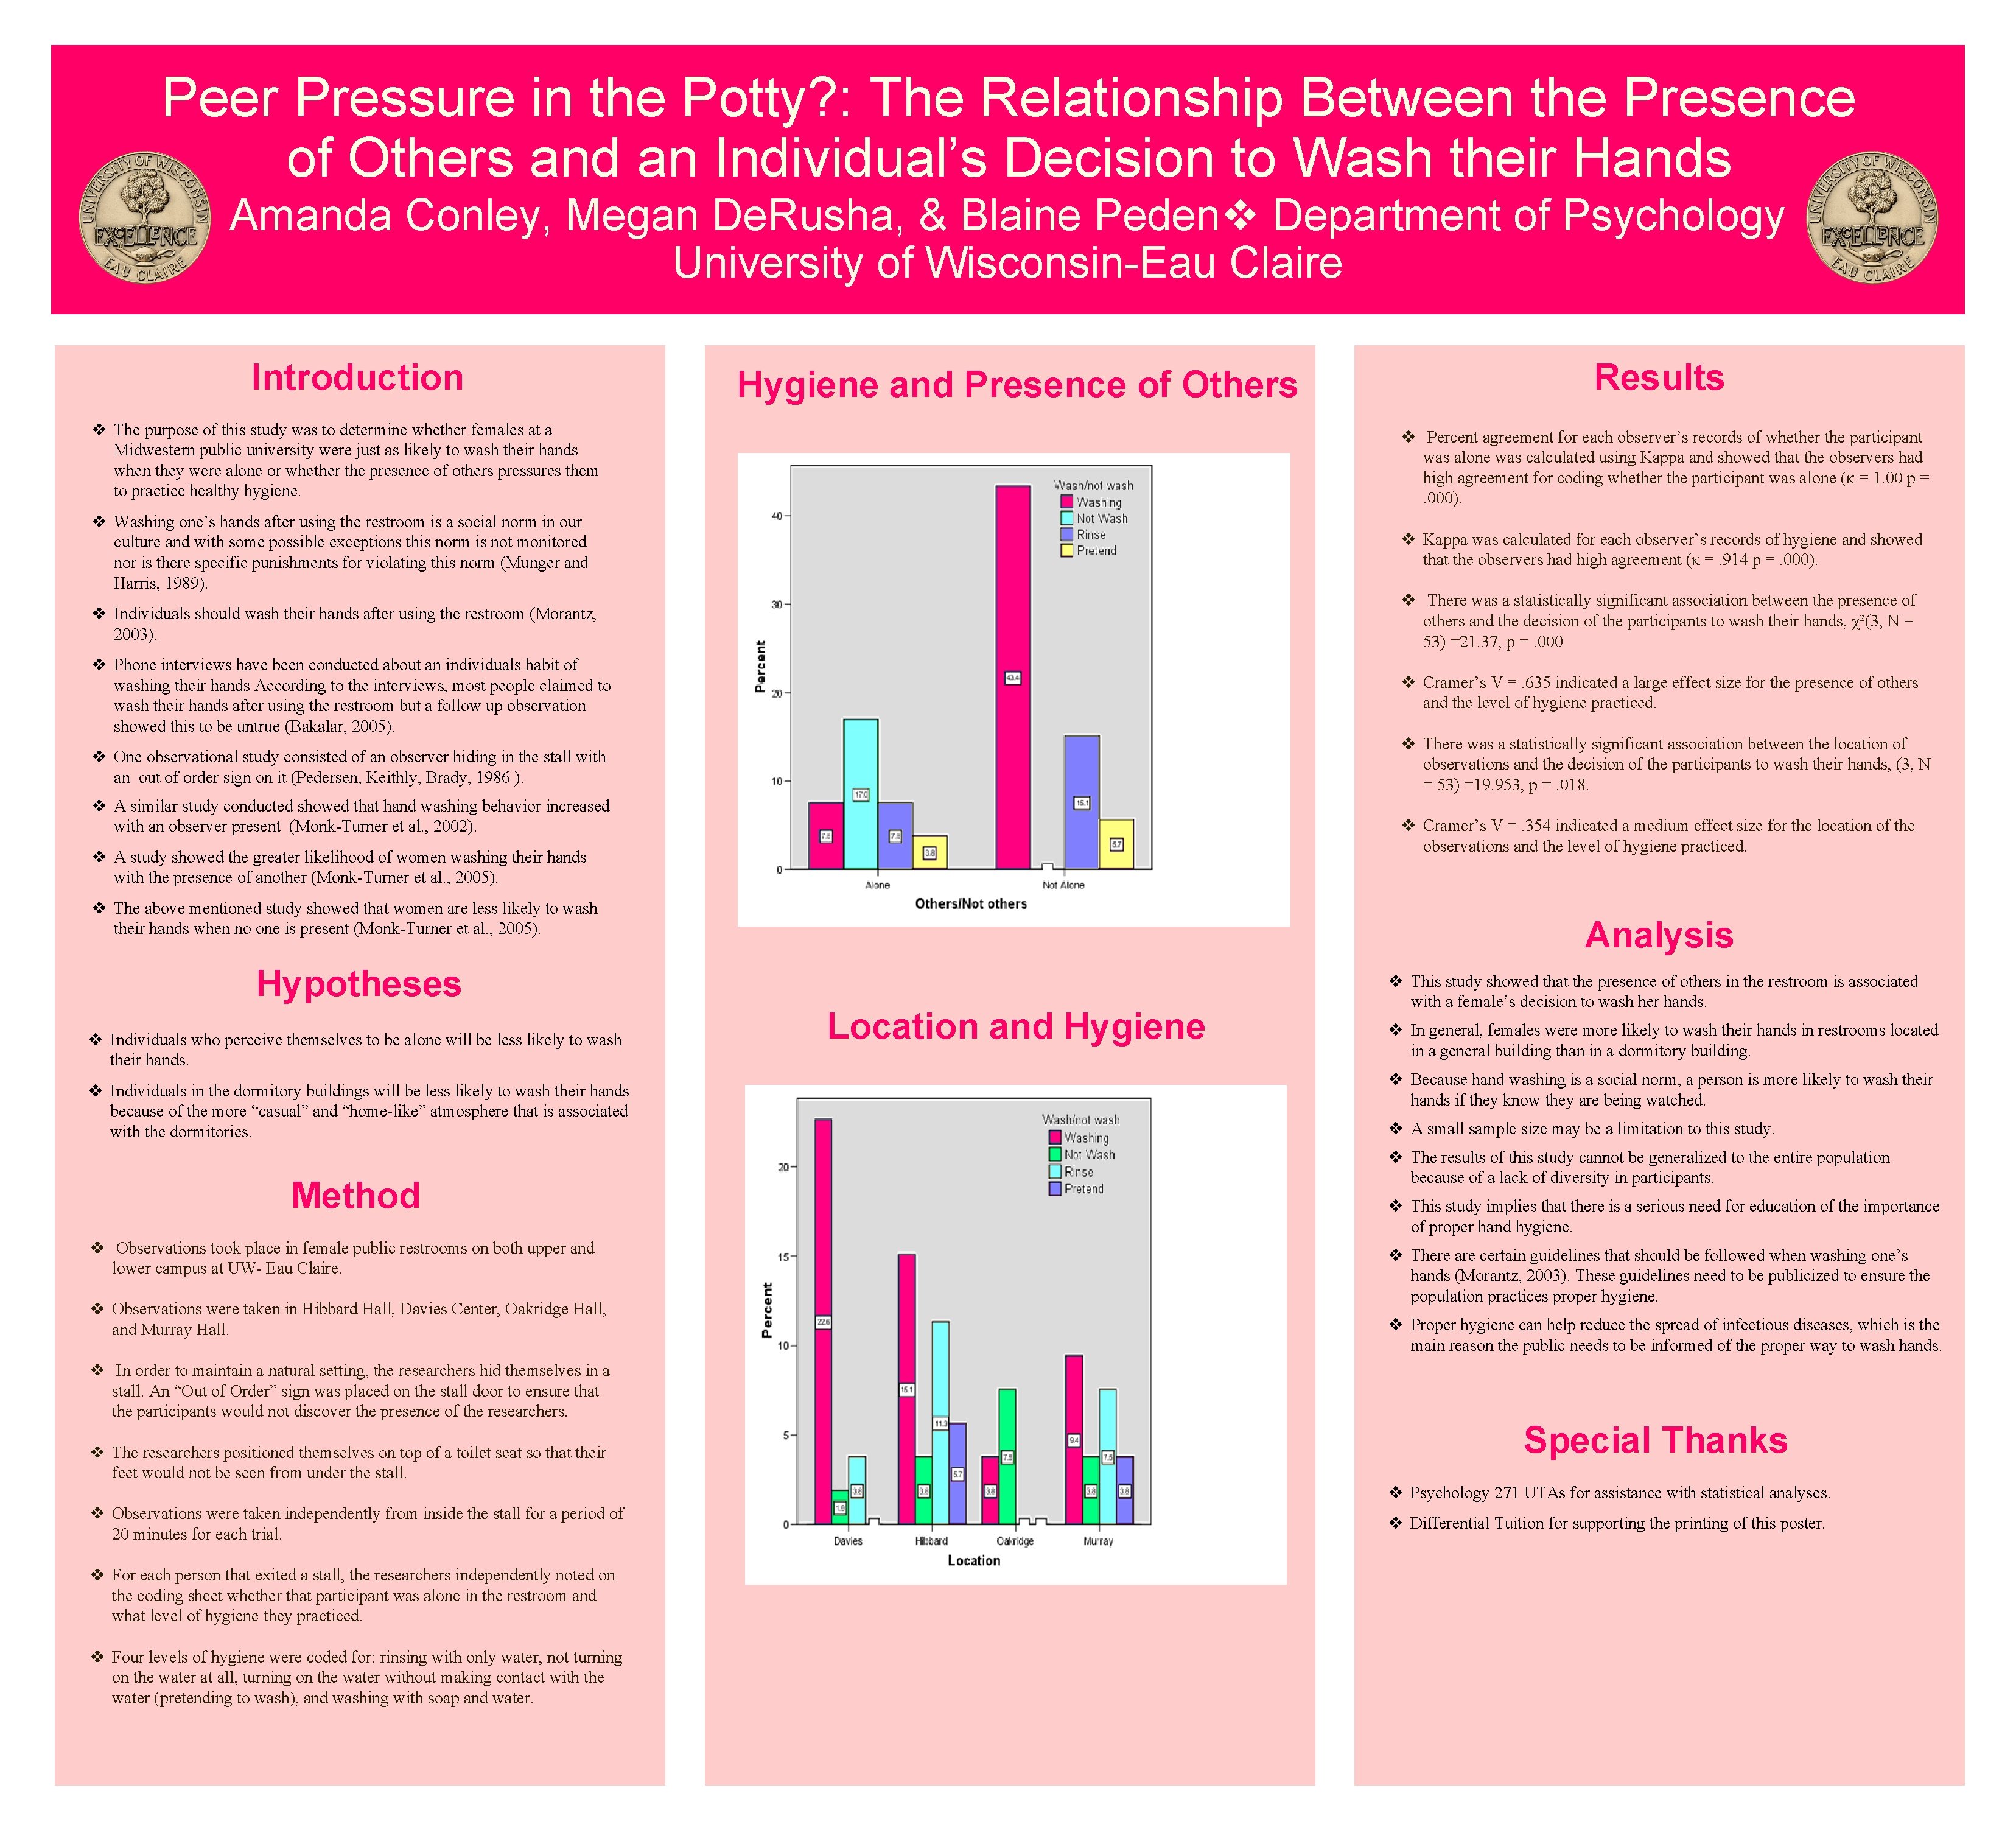 Peer Pressure in the Potty? : The Relationship Between the Presence of Others and